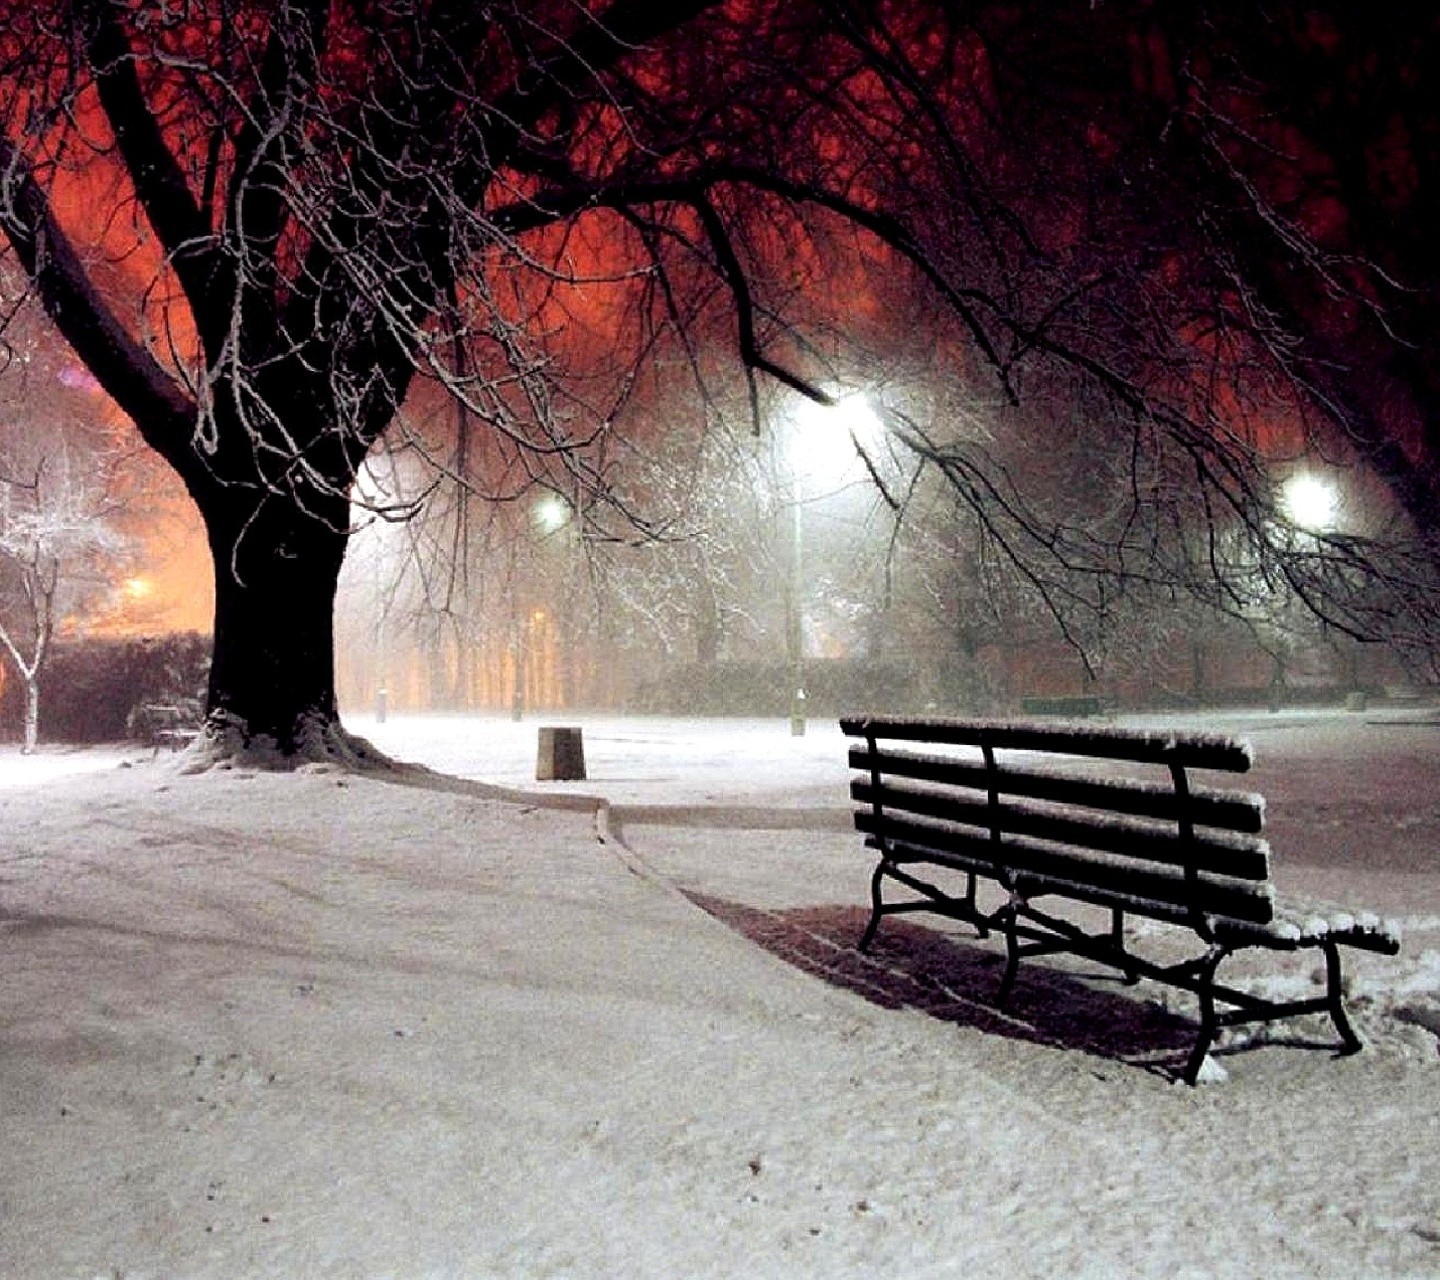 General 1440x1280 winter park bench snow cold outdoors